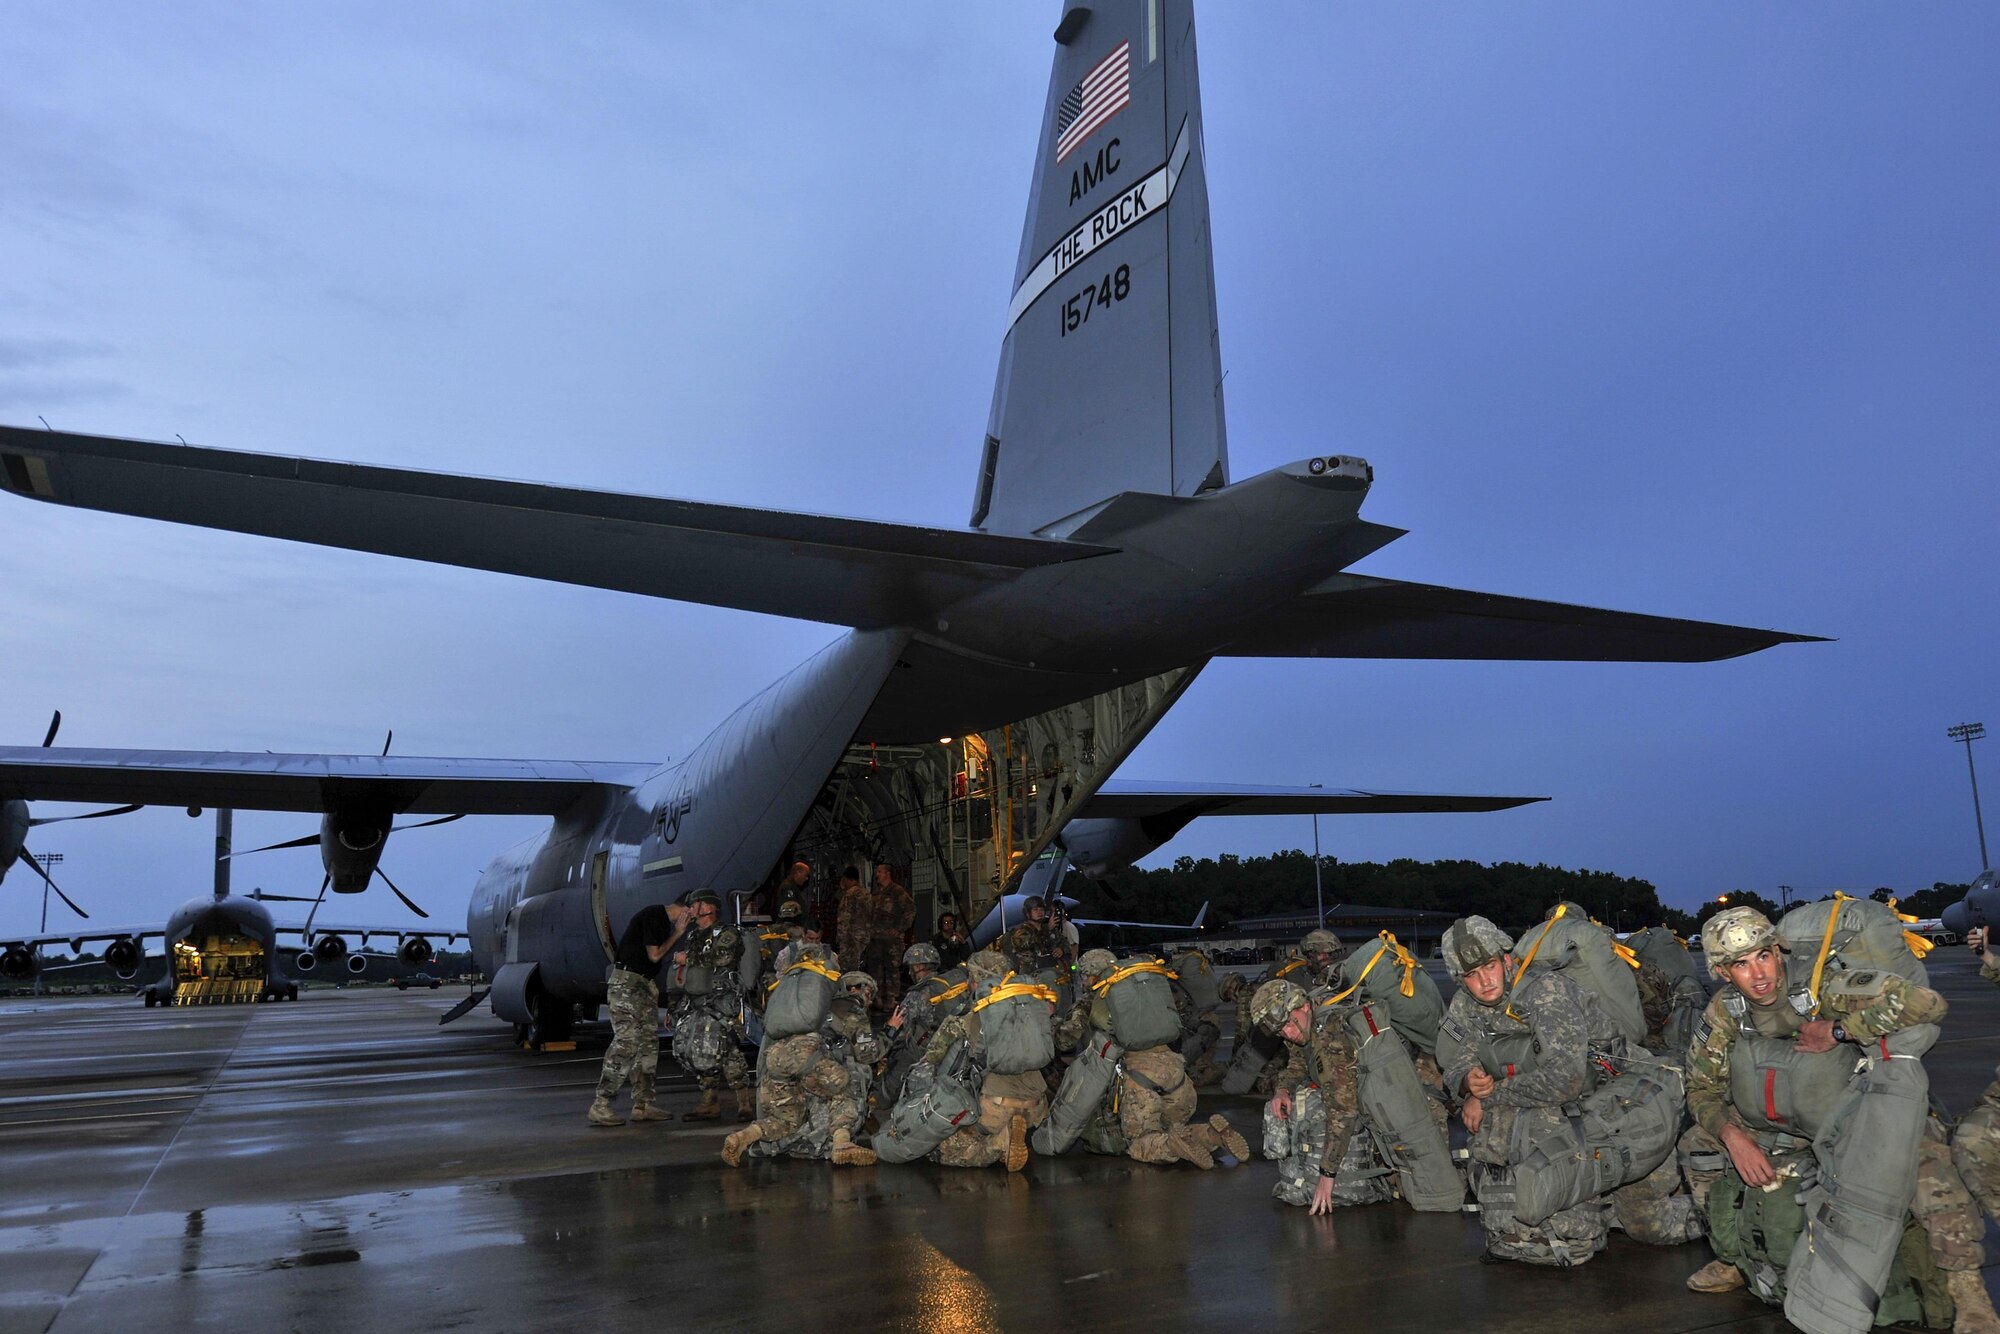 U.S. Army soldiers assigned to the 3rd Brigade Combat Team, 82nd Airborne Division from Fort Bragg, N.C., board a C-130J for a static-line jump in support of Exercise Green Flag Little Rock 16-09 Aug. 18, 2016, near Fort Polk, La. Six C-130Js assigned to Little Rock Air Force Base, Ark., and Dyess Air Force Base, Texas, participated in the exercise, lending their airlift capabilities to the 3rd BCT paratroopers. (U.S. Air Force photo by Airman Kevin Sommer Giron)